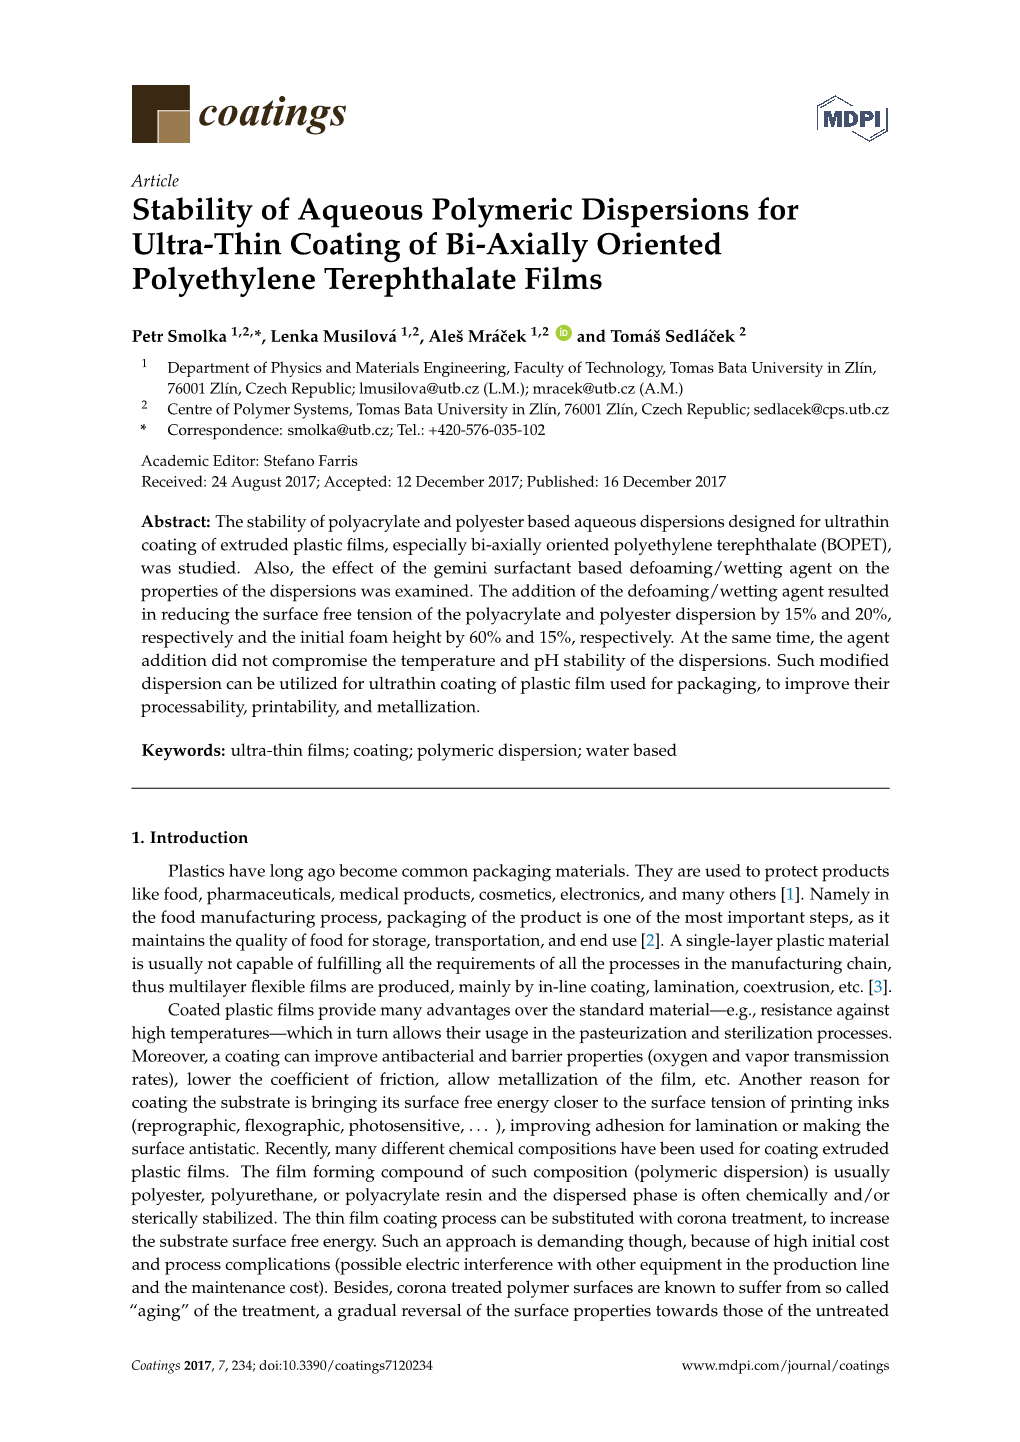 Stability of Aqueous Polymeric Dispersions for Ultra-Thin Coating of Bi-Axially Oriented Polyethylene Terephthalate Films